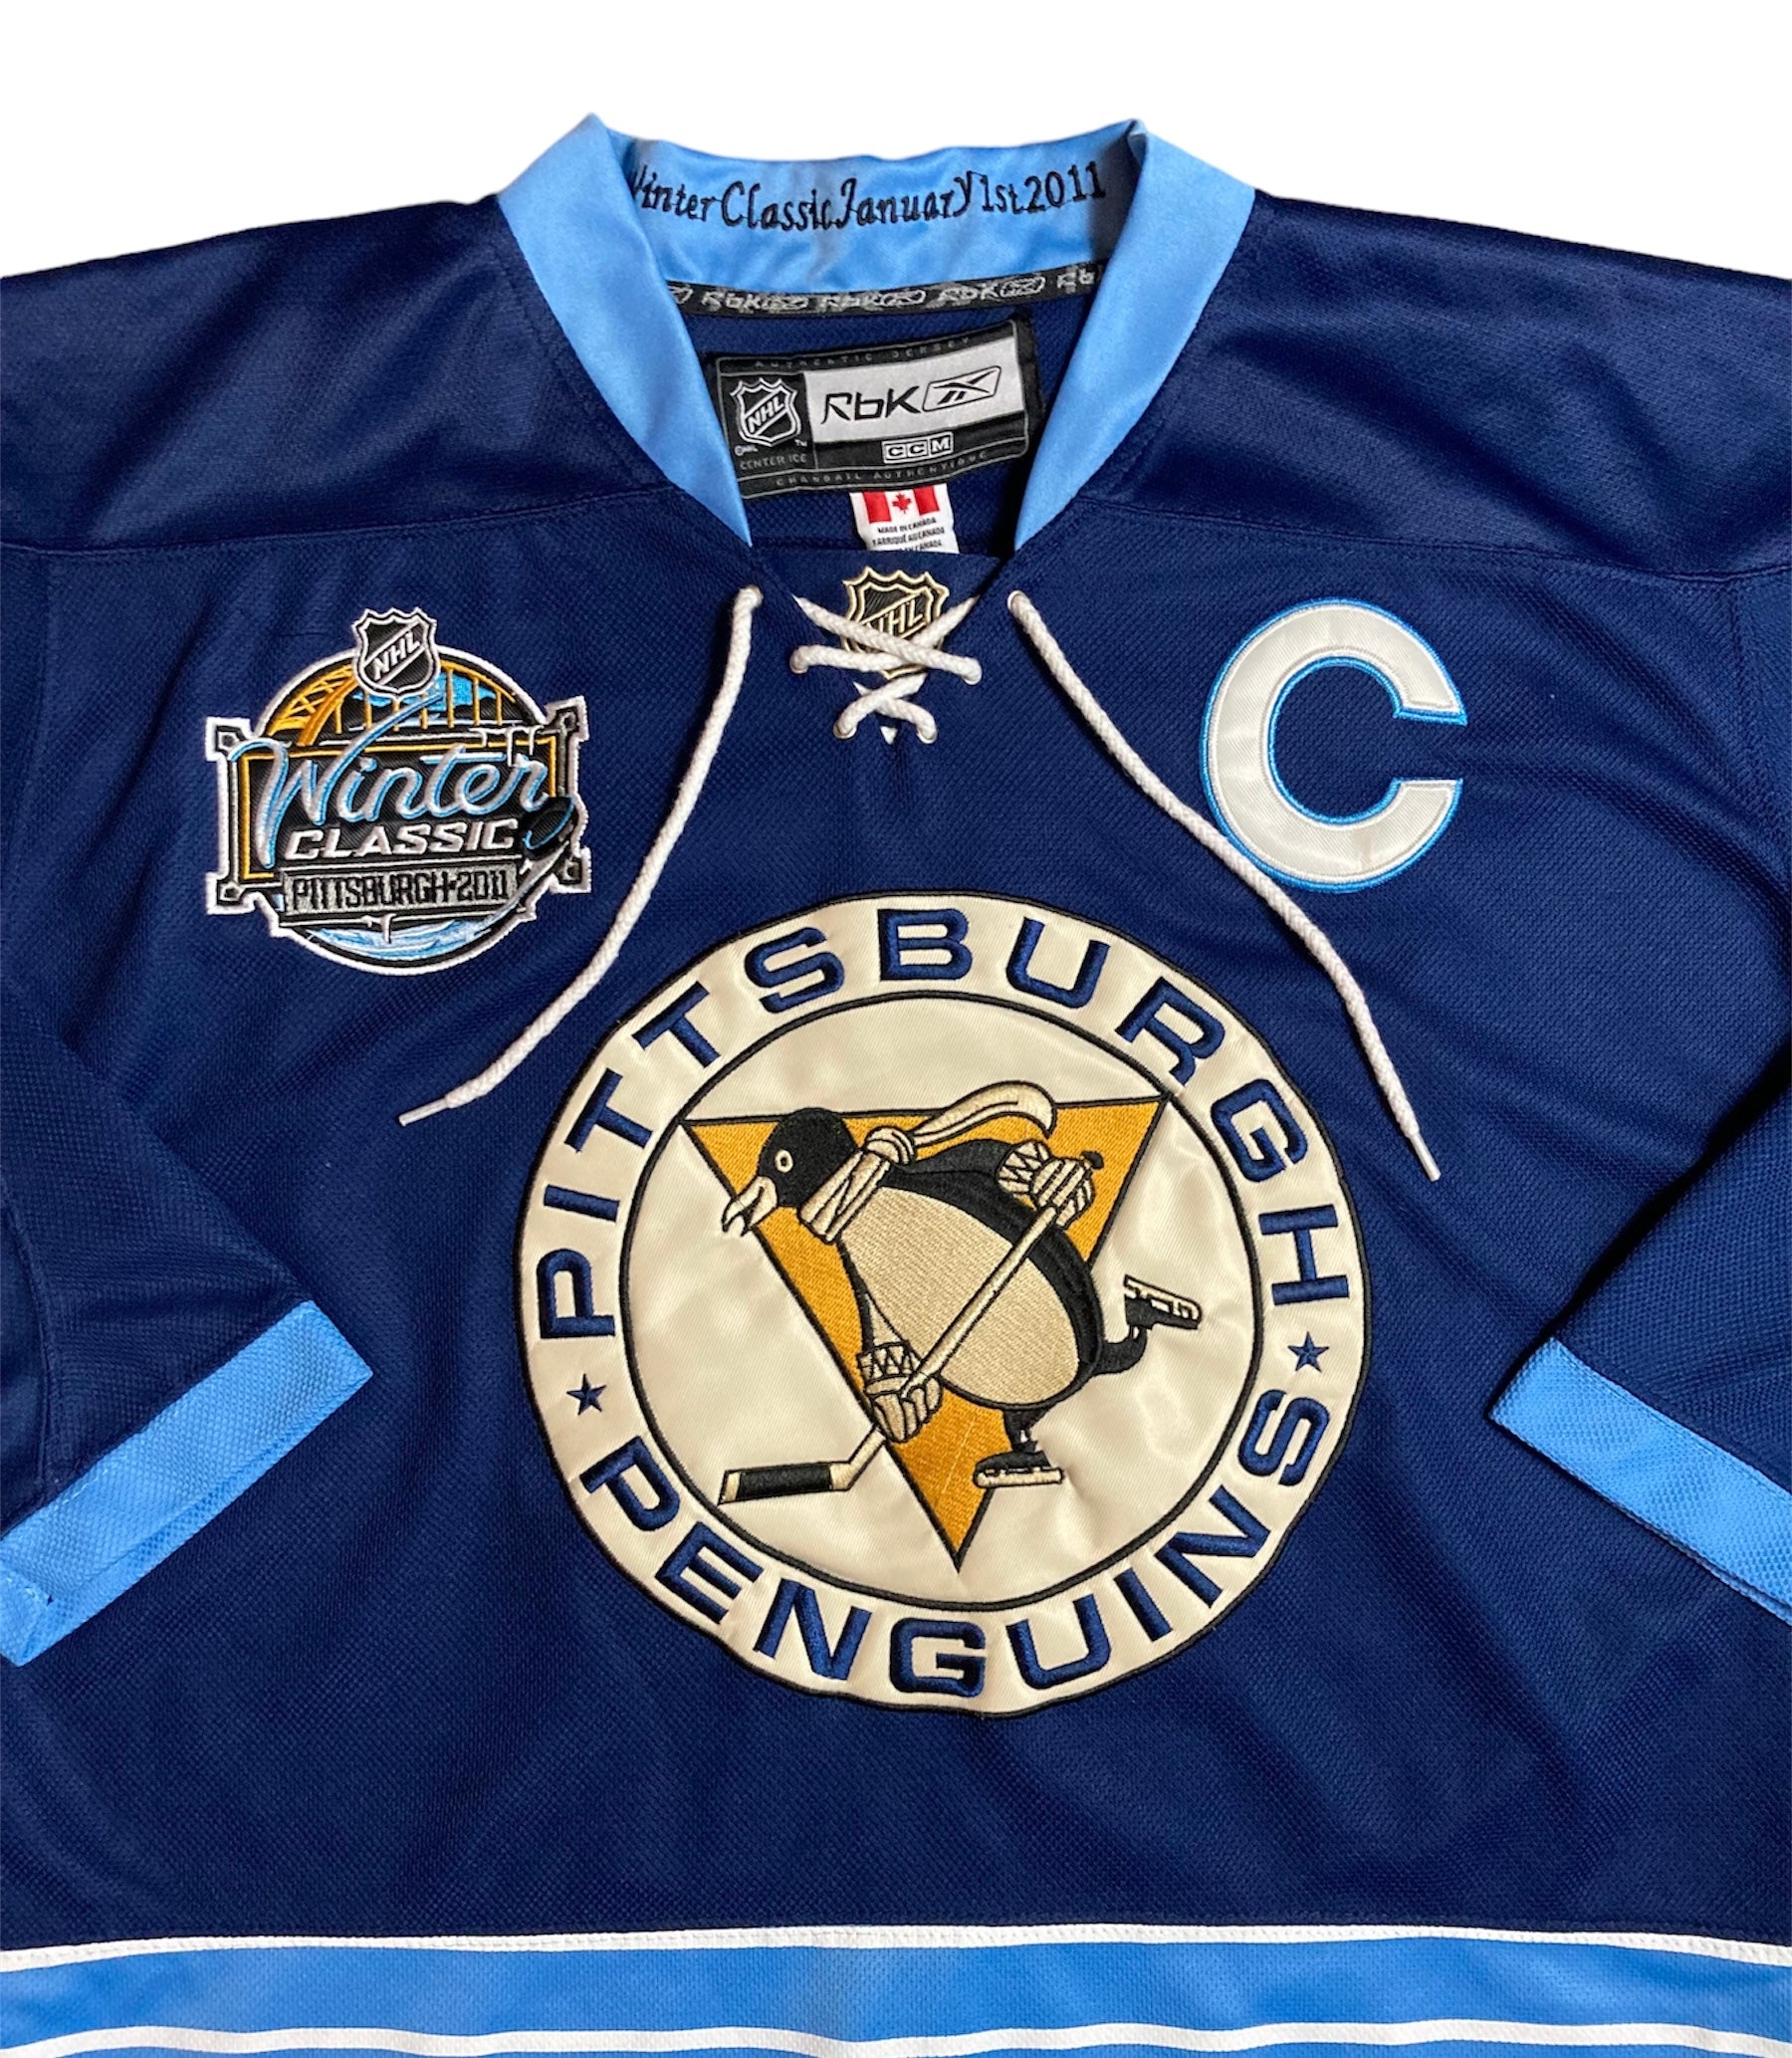 2011 Pittsburgh Penguins NHL Winter Classic Pre-Game Warm-Up Worn Jerseys 